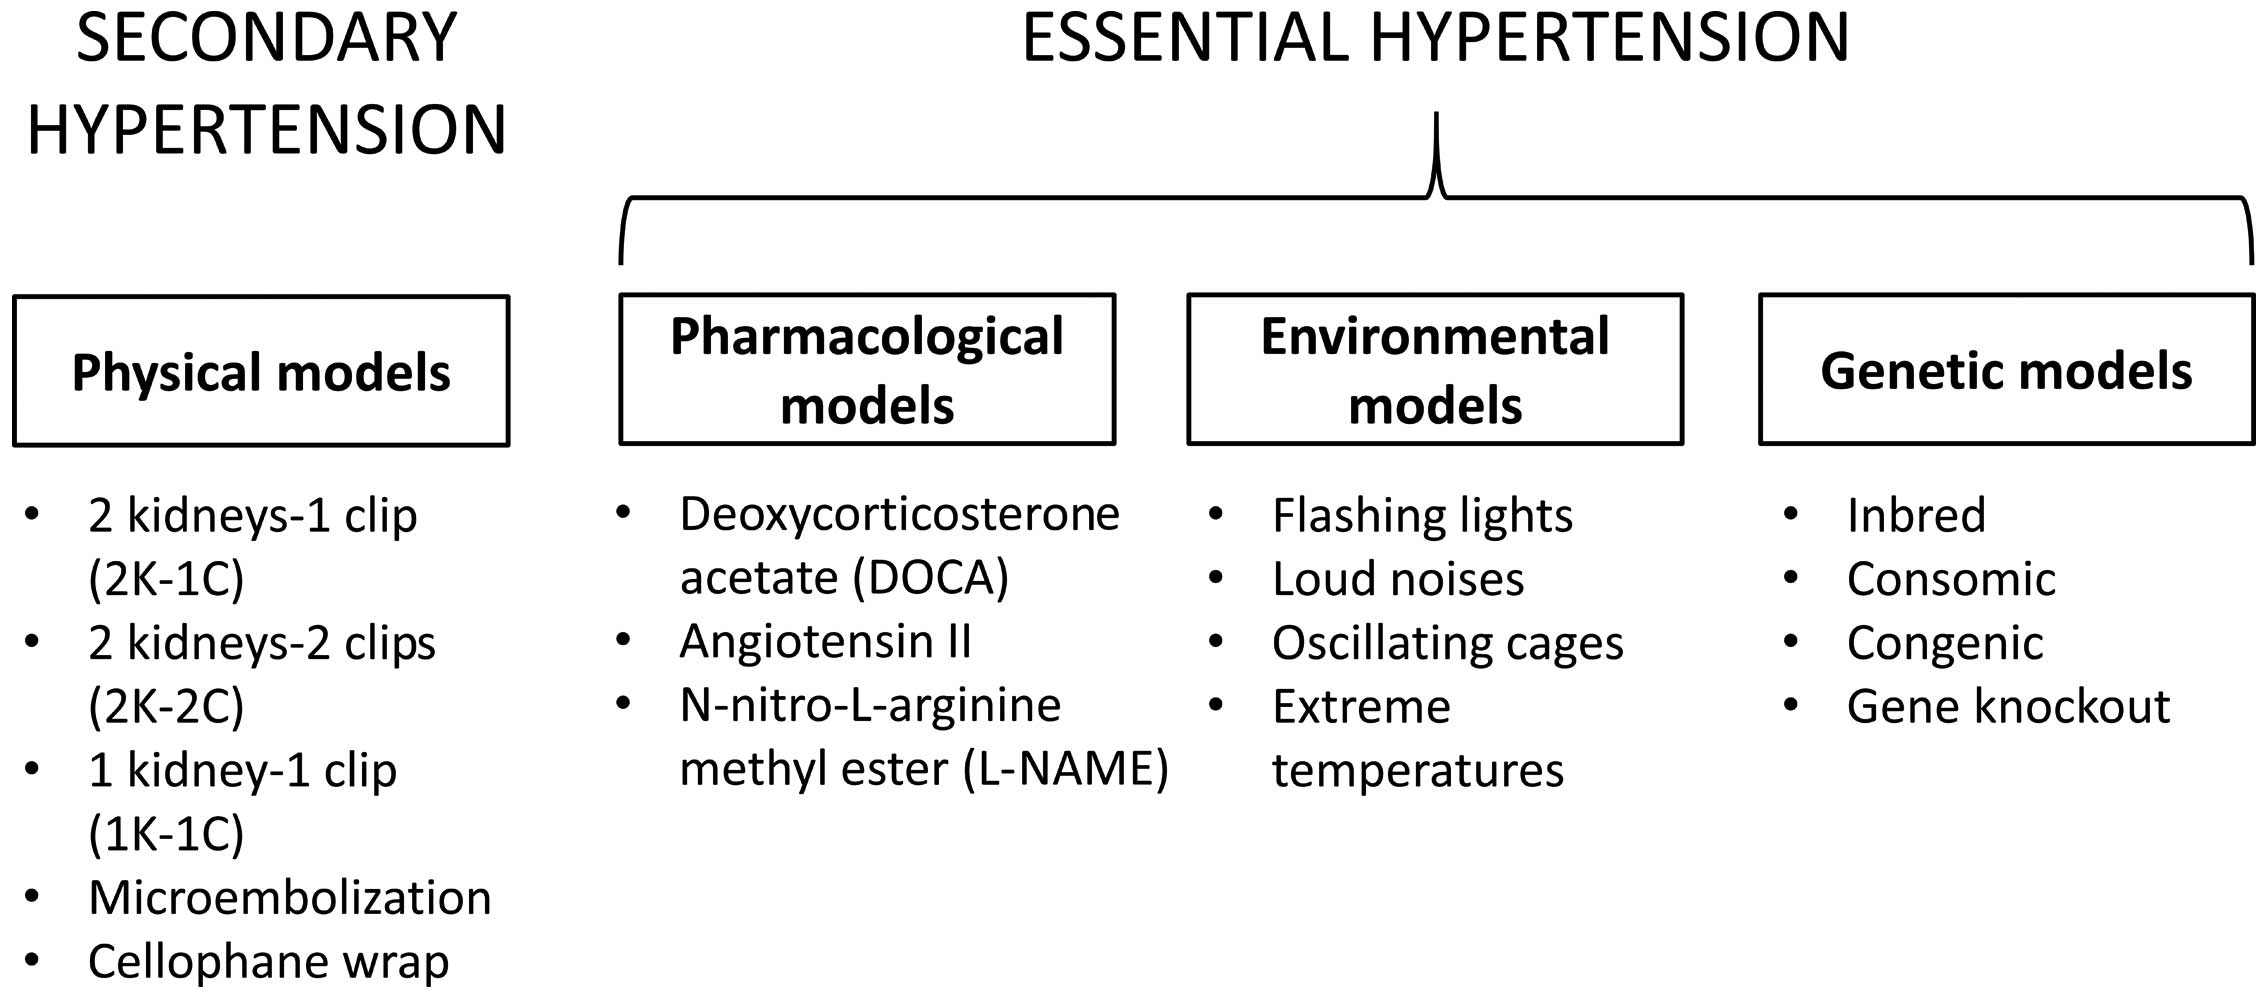 primary and secondary hypertension causes